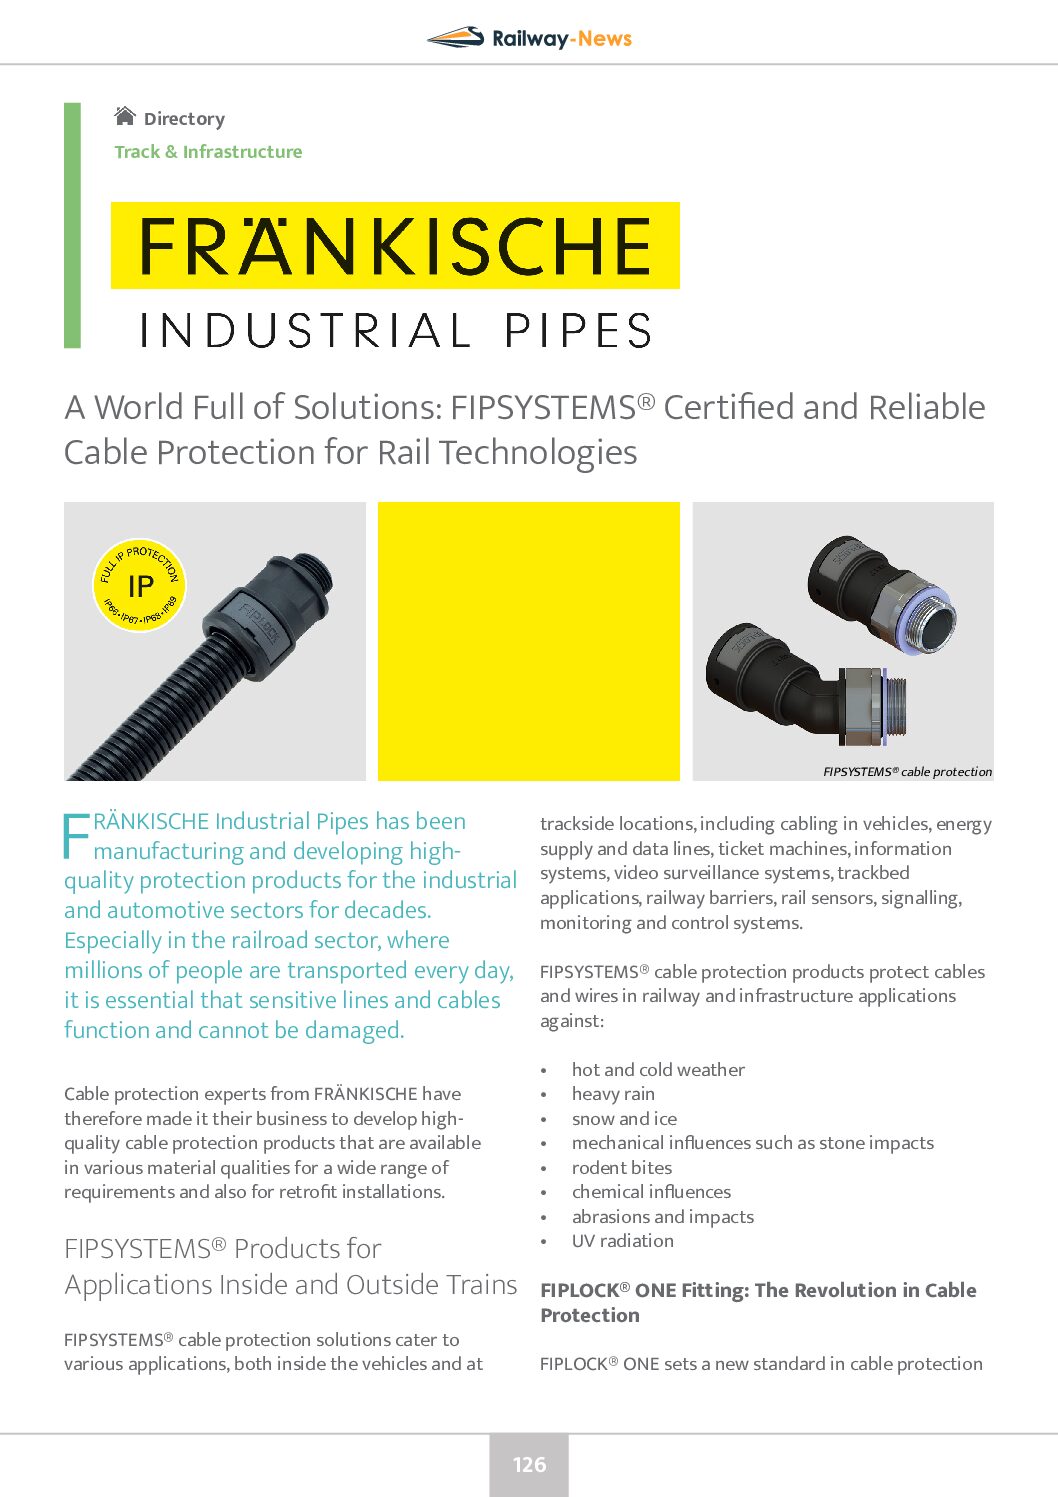 A World Full of Solutions: FIPSYSTEMS® Certified and Reliable Cable Protection for Rail Technologies